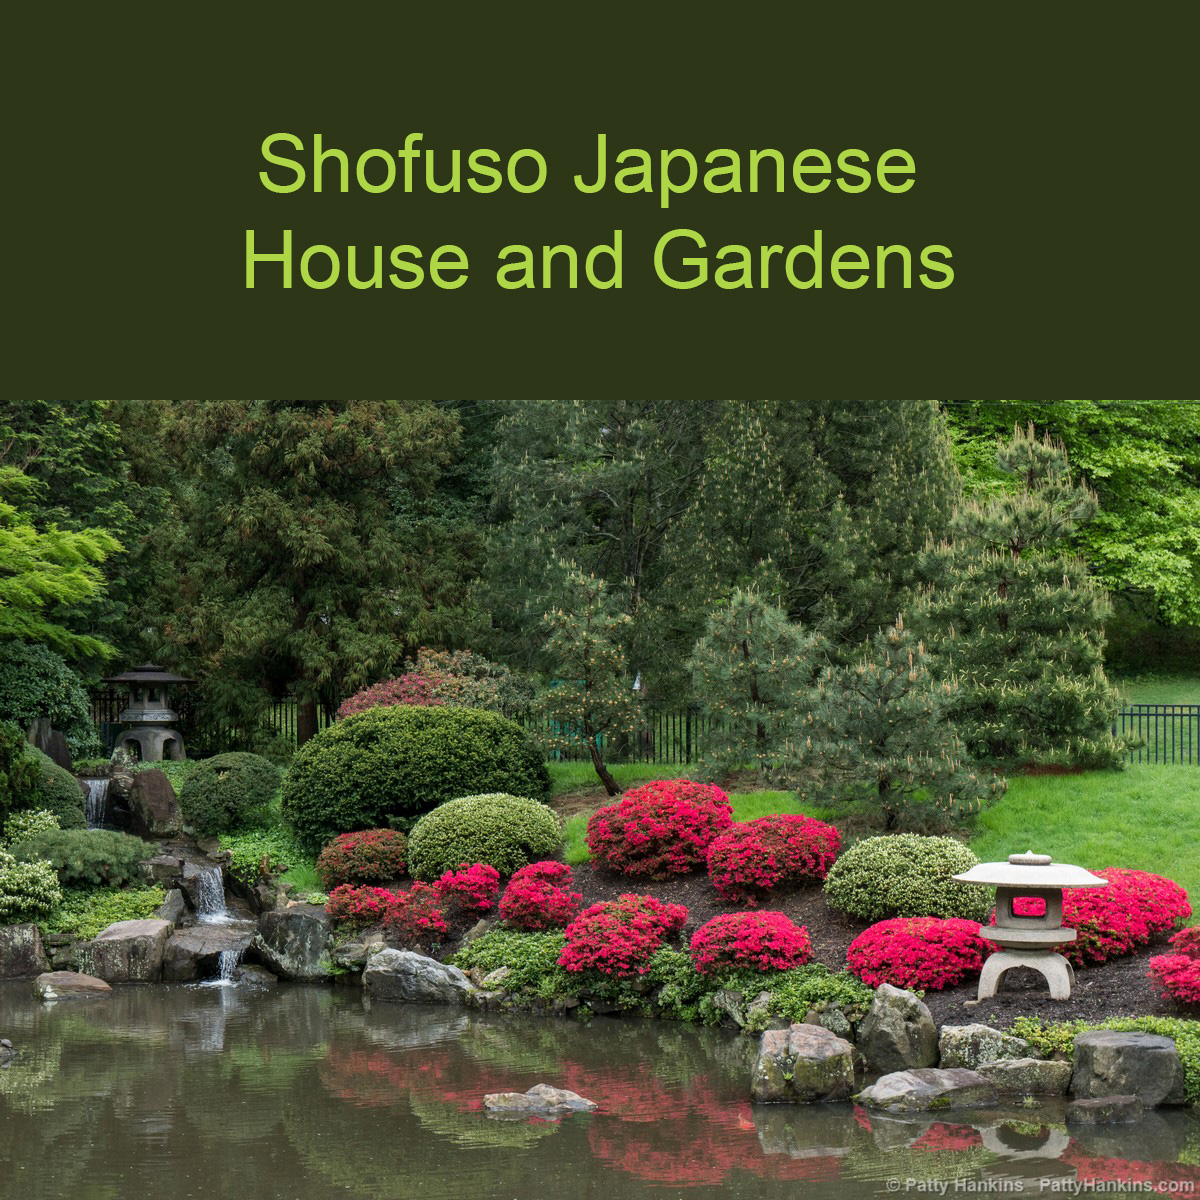 Shofuso Japanese House and Gardens